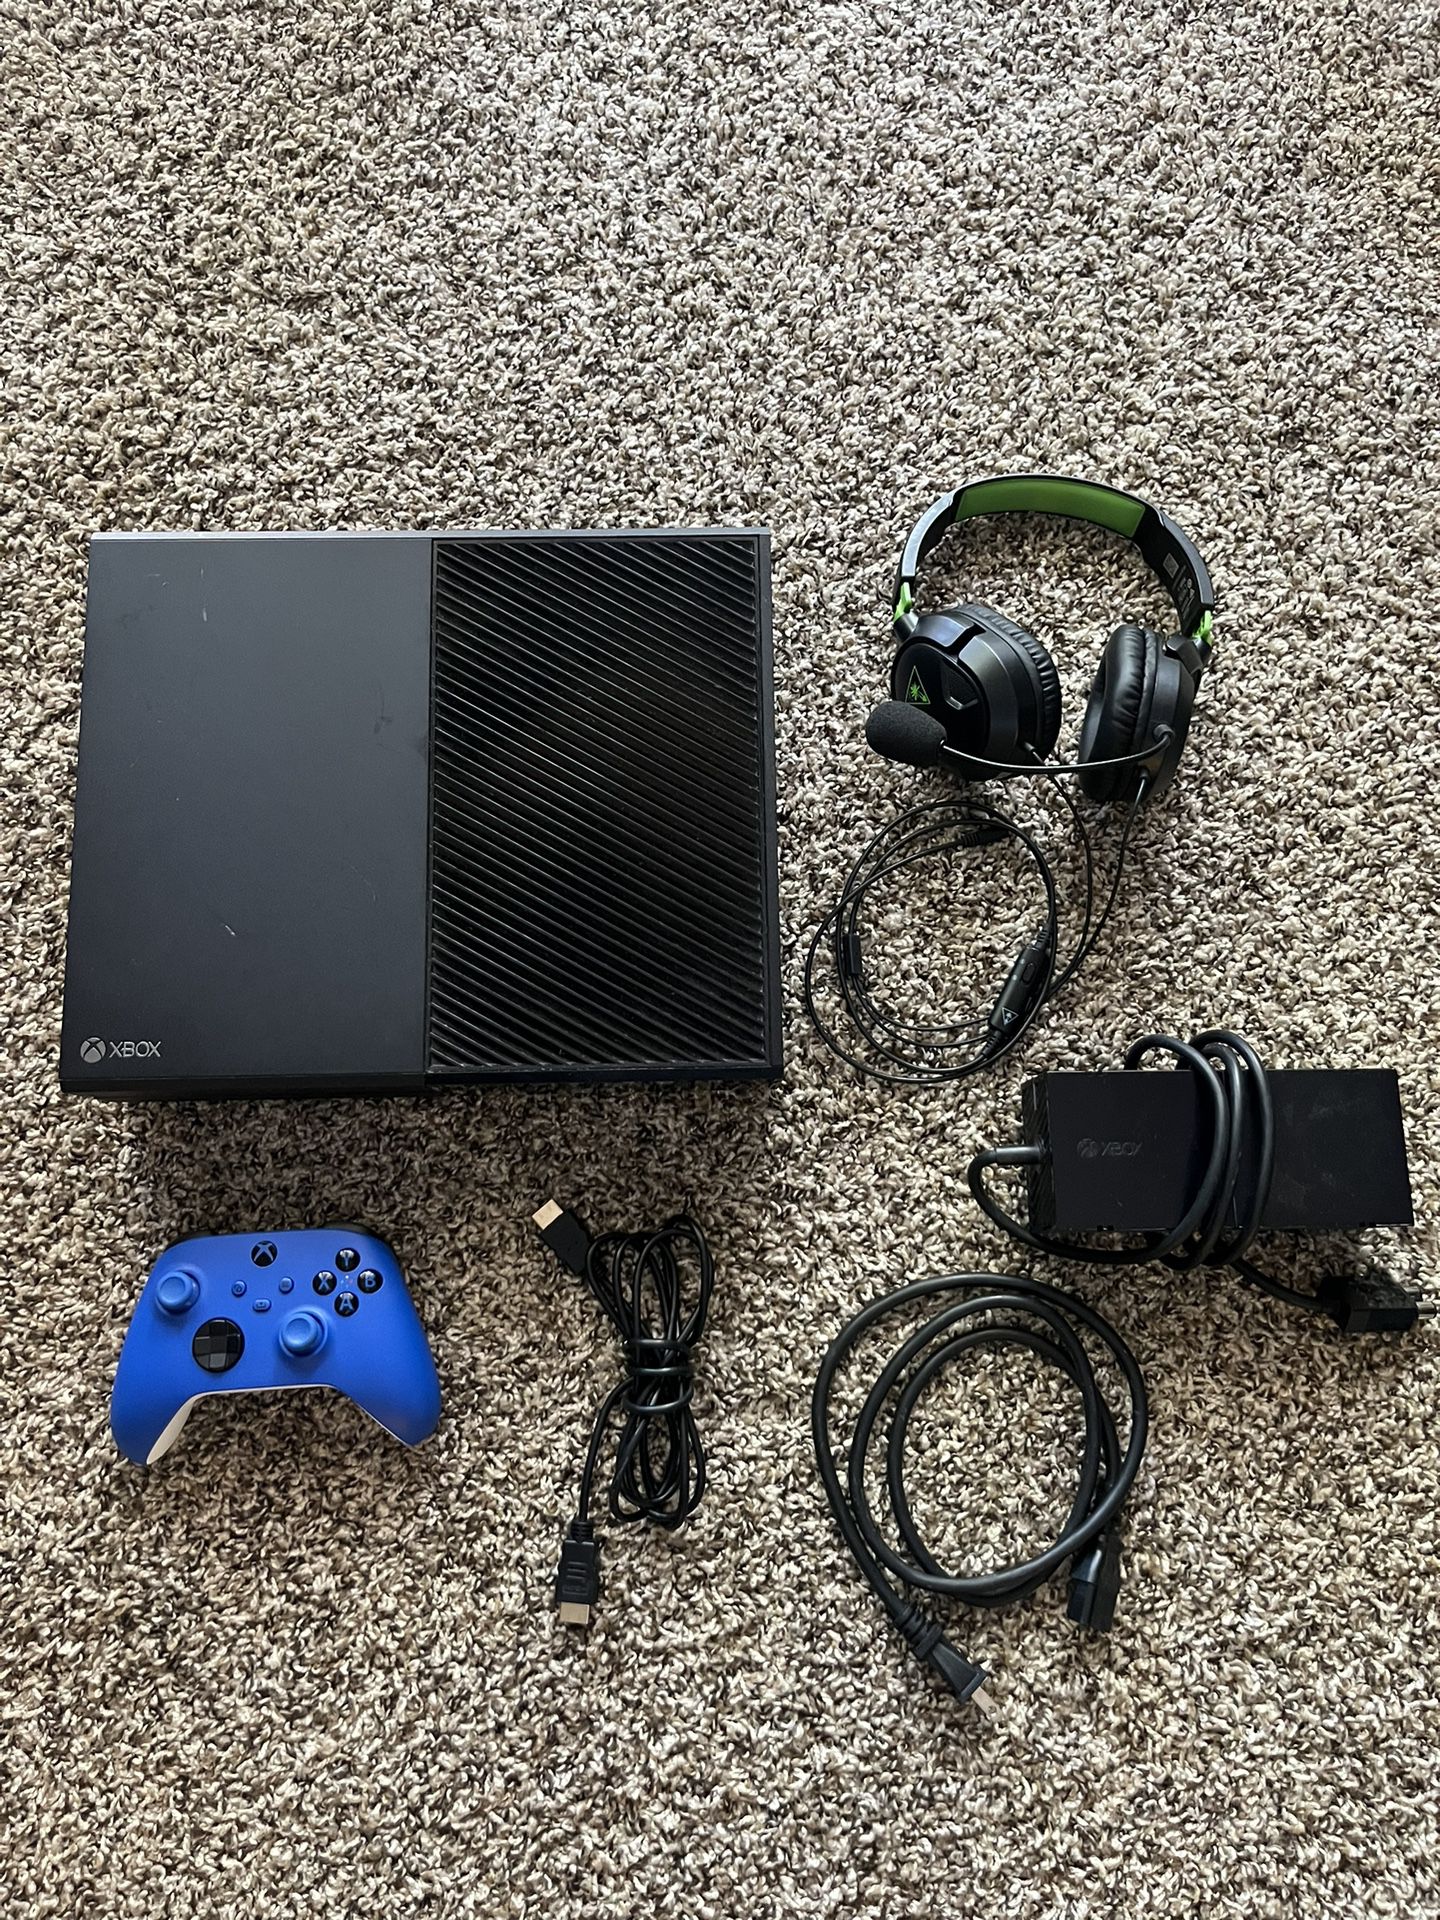 Xbox One (Disc Edition), Controller, Turtle Beach Headset